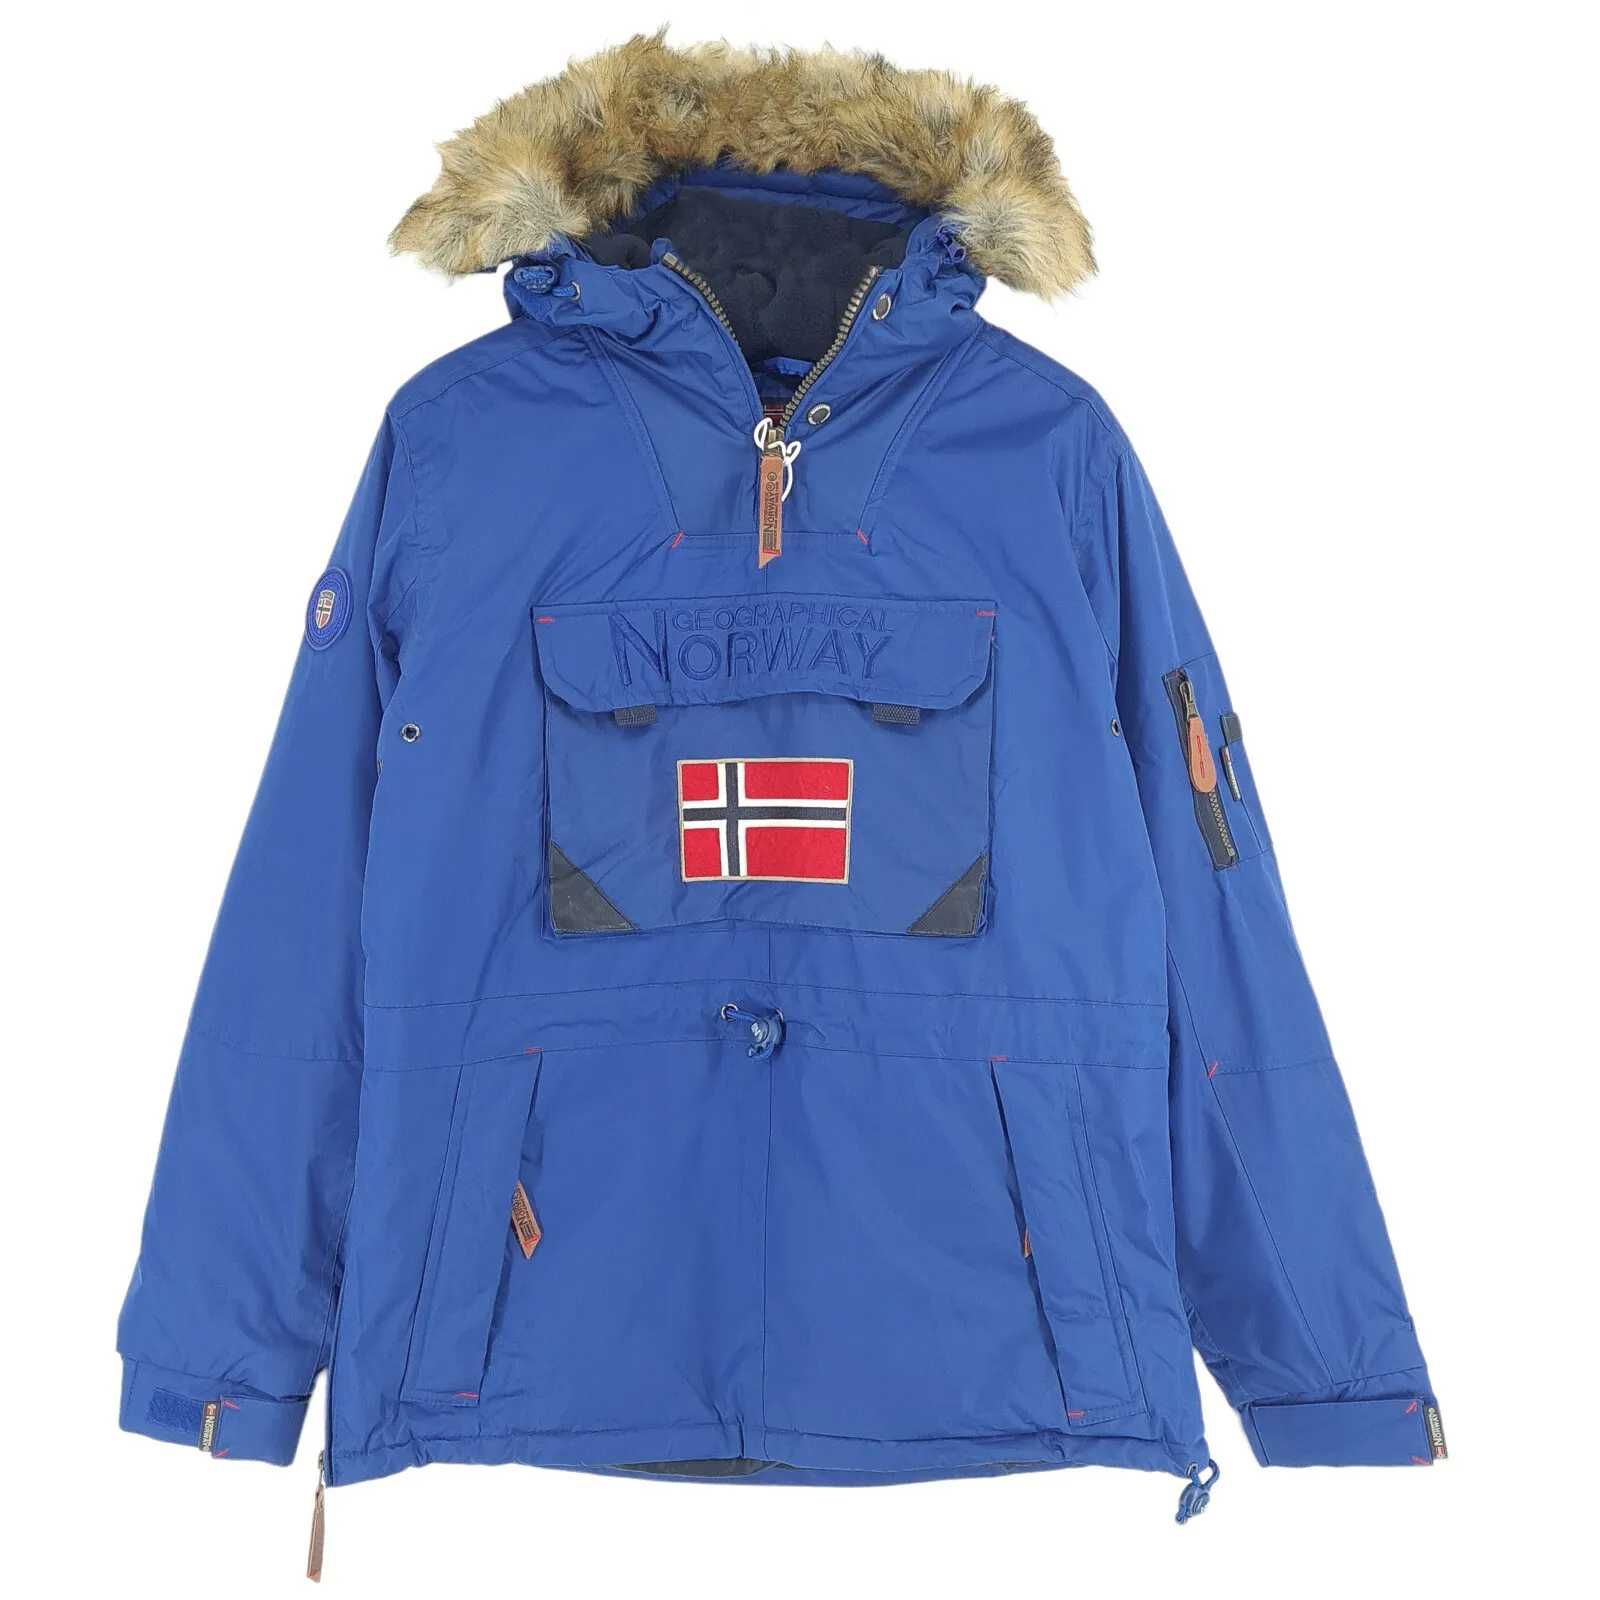 2 Geographical Norway